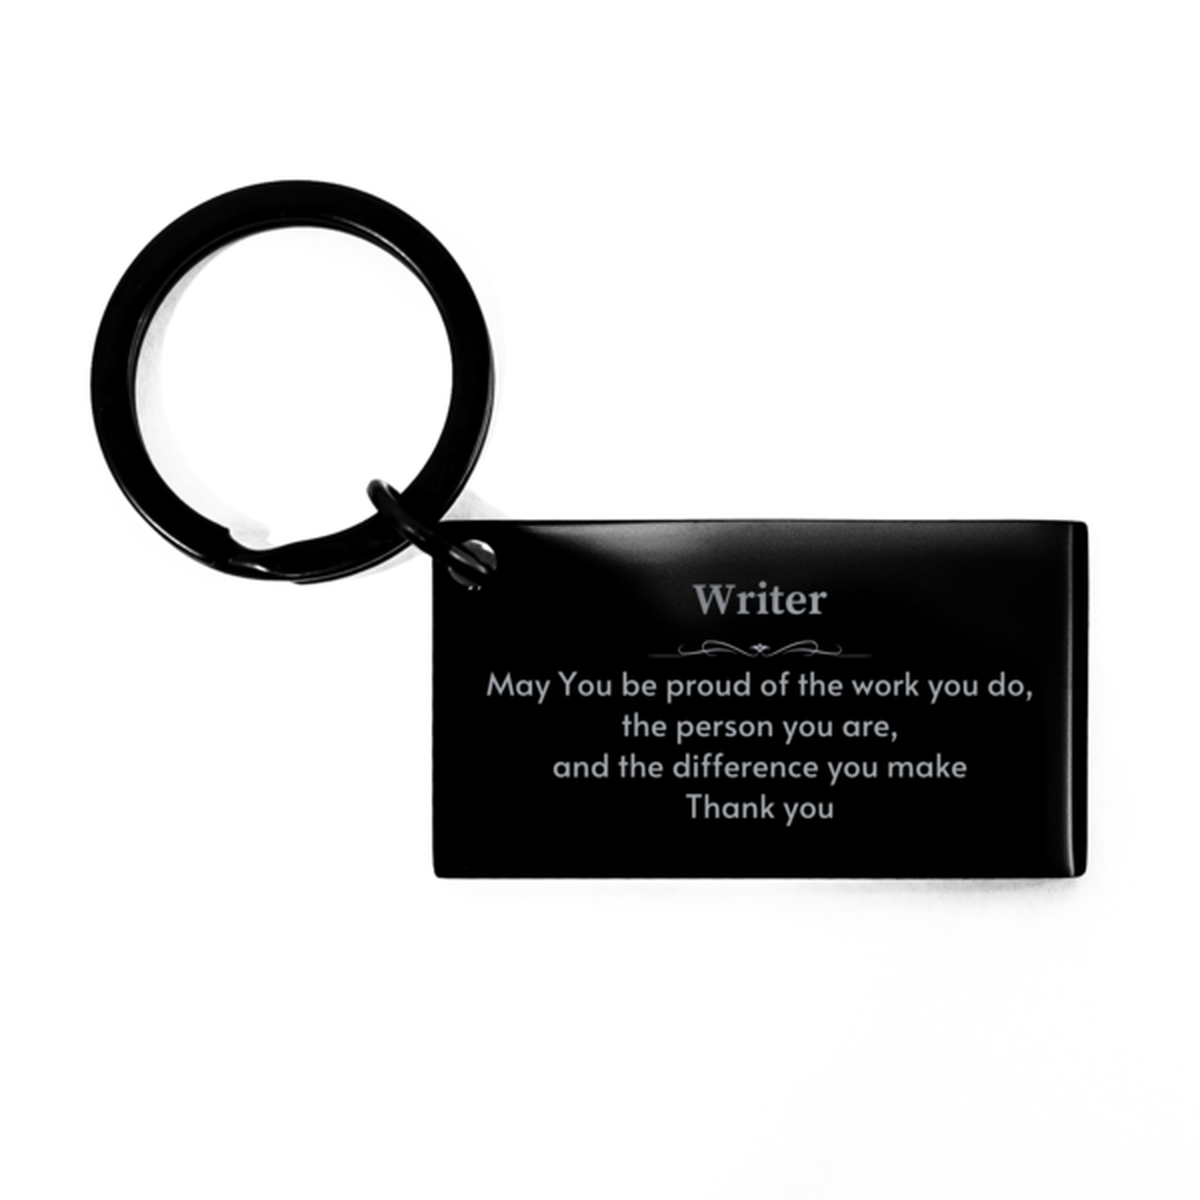 Heartwarming Keychain Retirement Coworkers Gifts for Writer, Auctioneer May You be proud of the work you do, the person you are Gifts for Boss Men Women Friends